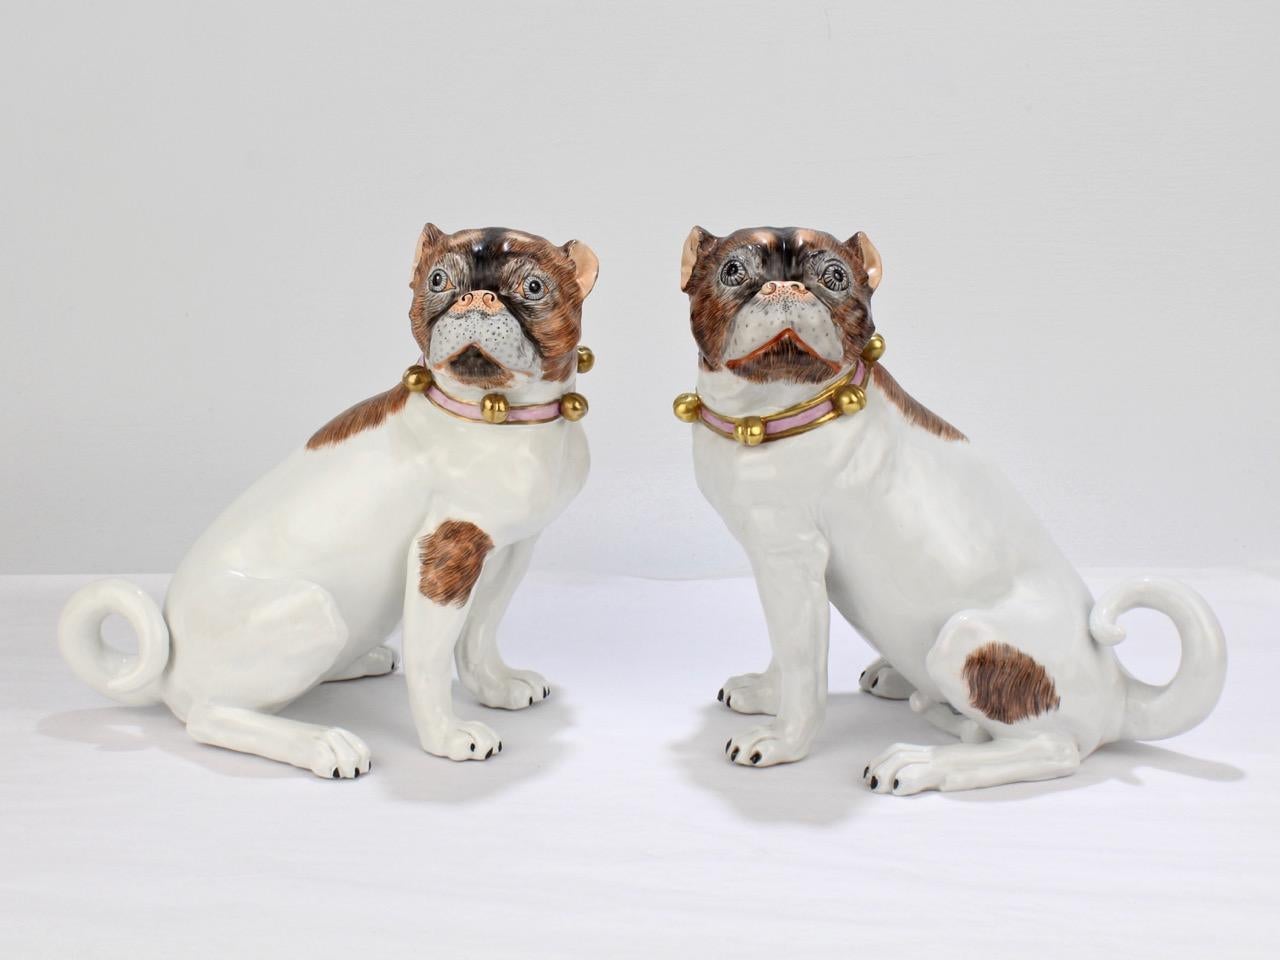 A fine pair or complimentary Dresden porcelain pug figurines.

Modeled as a matched pair, one is female and the other male. 

Each is decorated in brown and black paints, and bears a collar with bells.

The underside of each bears a blue